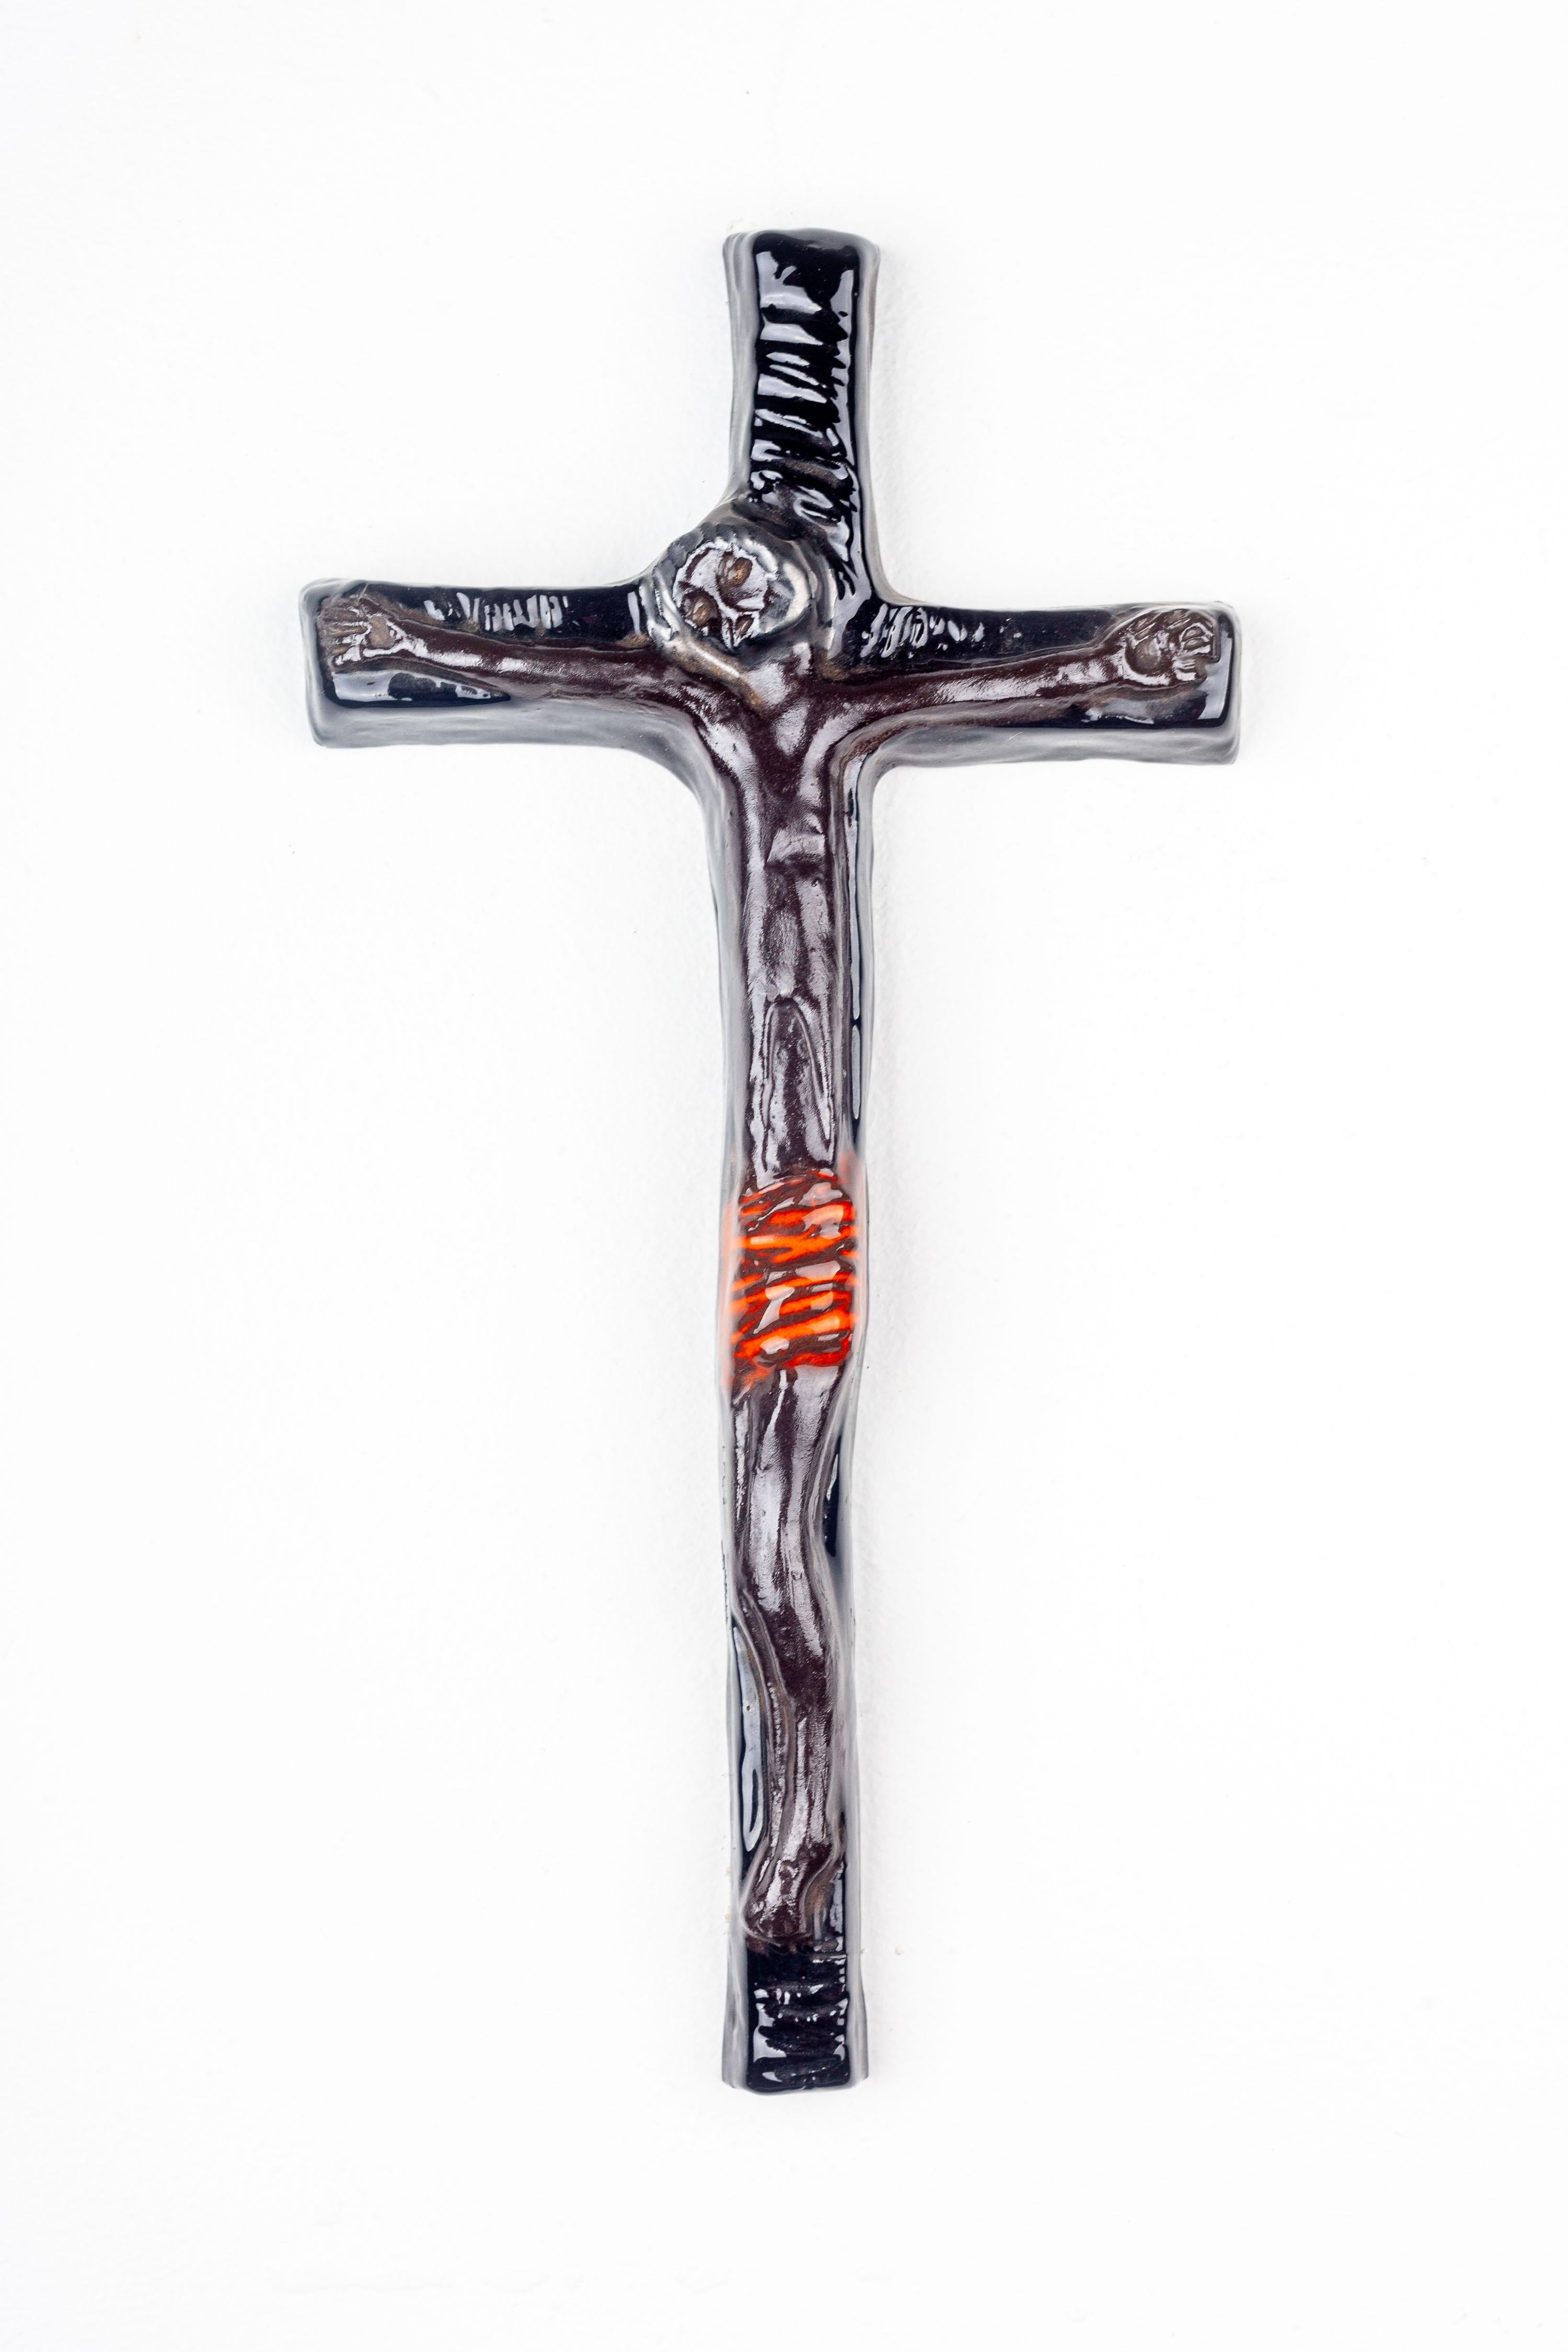 This wall cross is a representative work of mid-century European studio pottery, showcasing the era's distinctive approach to religious motifs. Handmade by studio artists, the cross combines the solemnity of religious art with the aesthetic